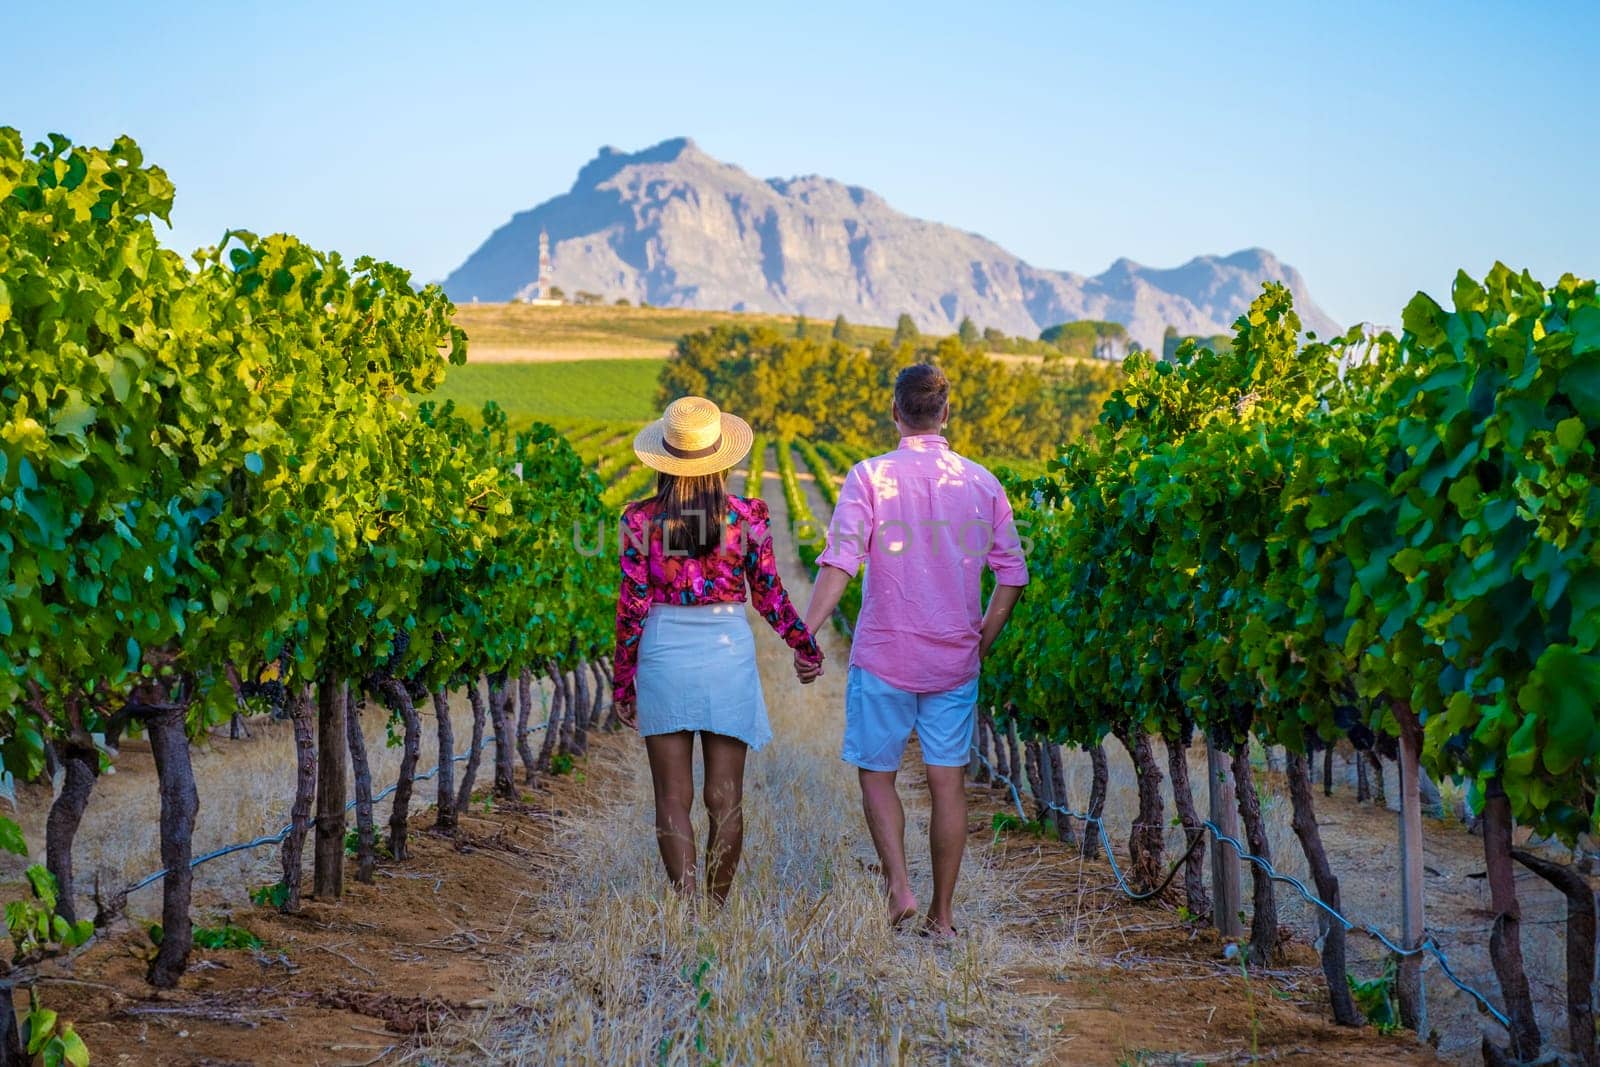 Vineyard landscape at sunset with mountains in Stellenbosch Cape Town South Africa. wine grapes on the vine in a vineyard, a couple man and woman walking in a Vineyard in Stellenbosch South Africa